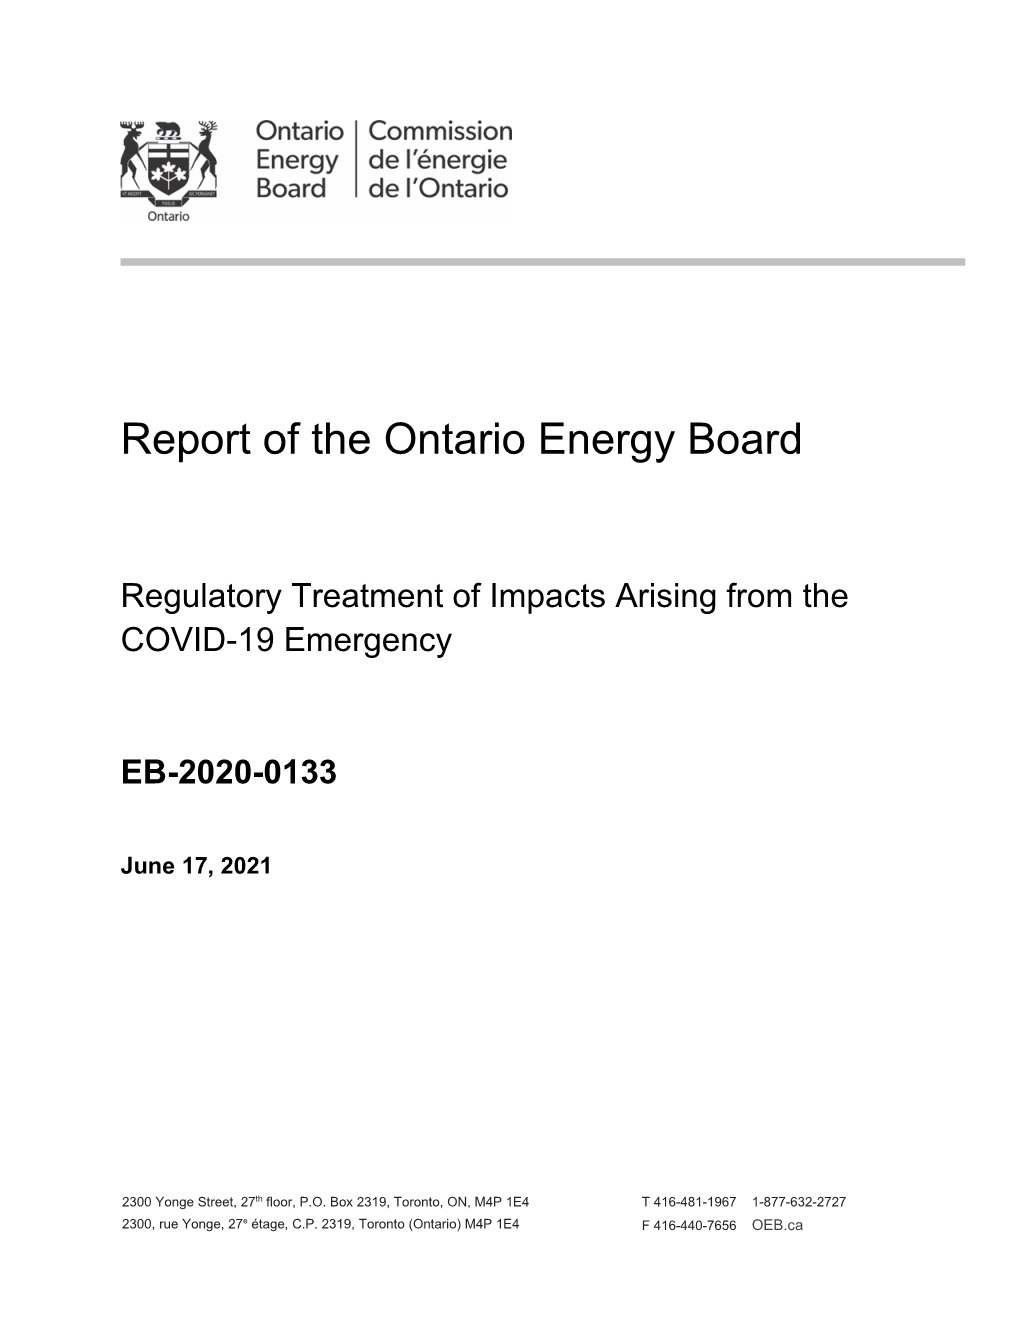 Report of the OEB: Regulatory Treatment of Impacts Arising From